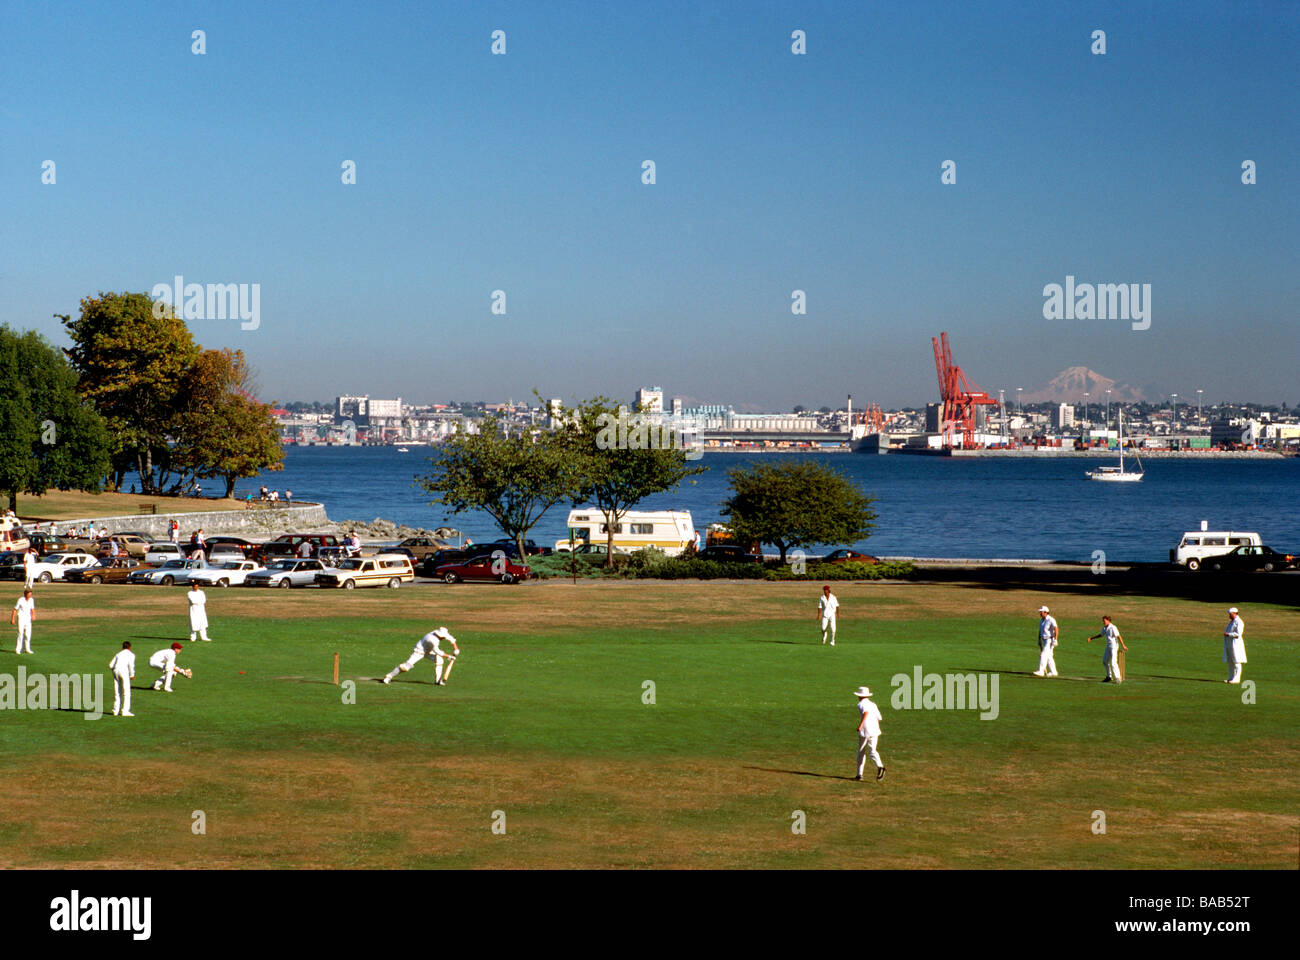 Cricket Team Players playing a Cricket Match on the Stanley Park Pitch Ground in Summer in Vancouver British Columbia Canada Stock Photo